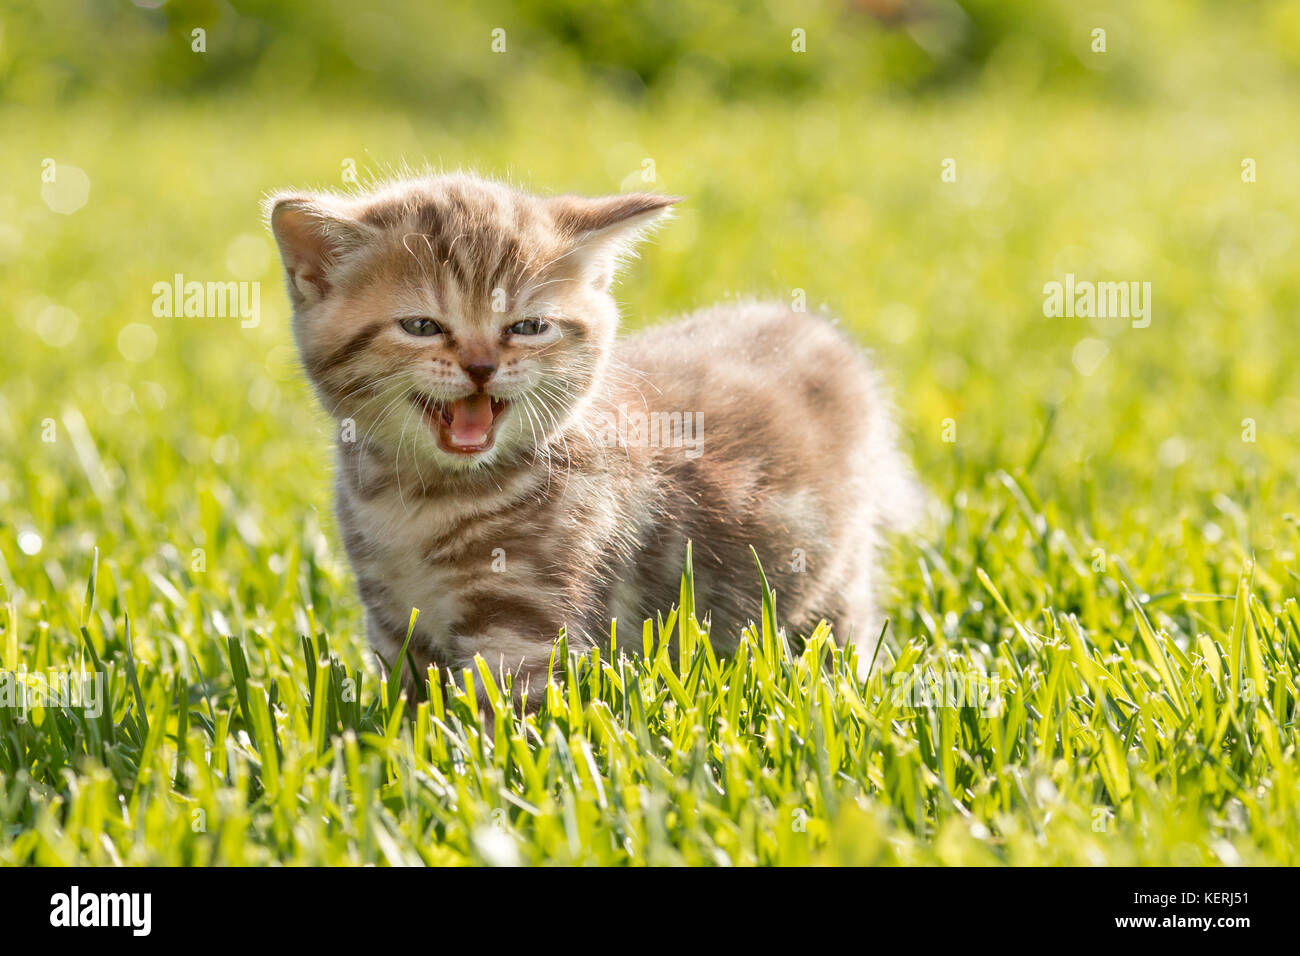 Young cat meowing in grass Stock Photo